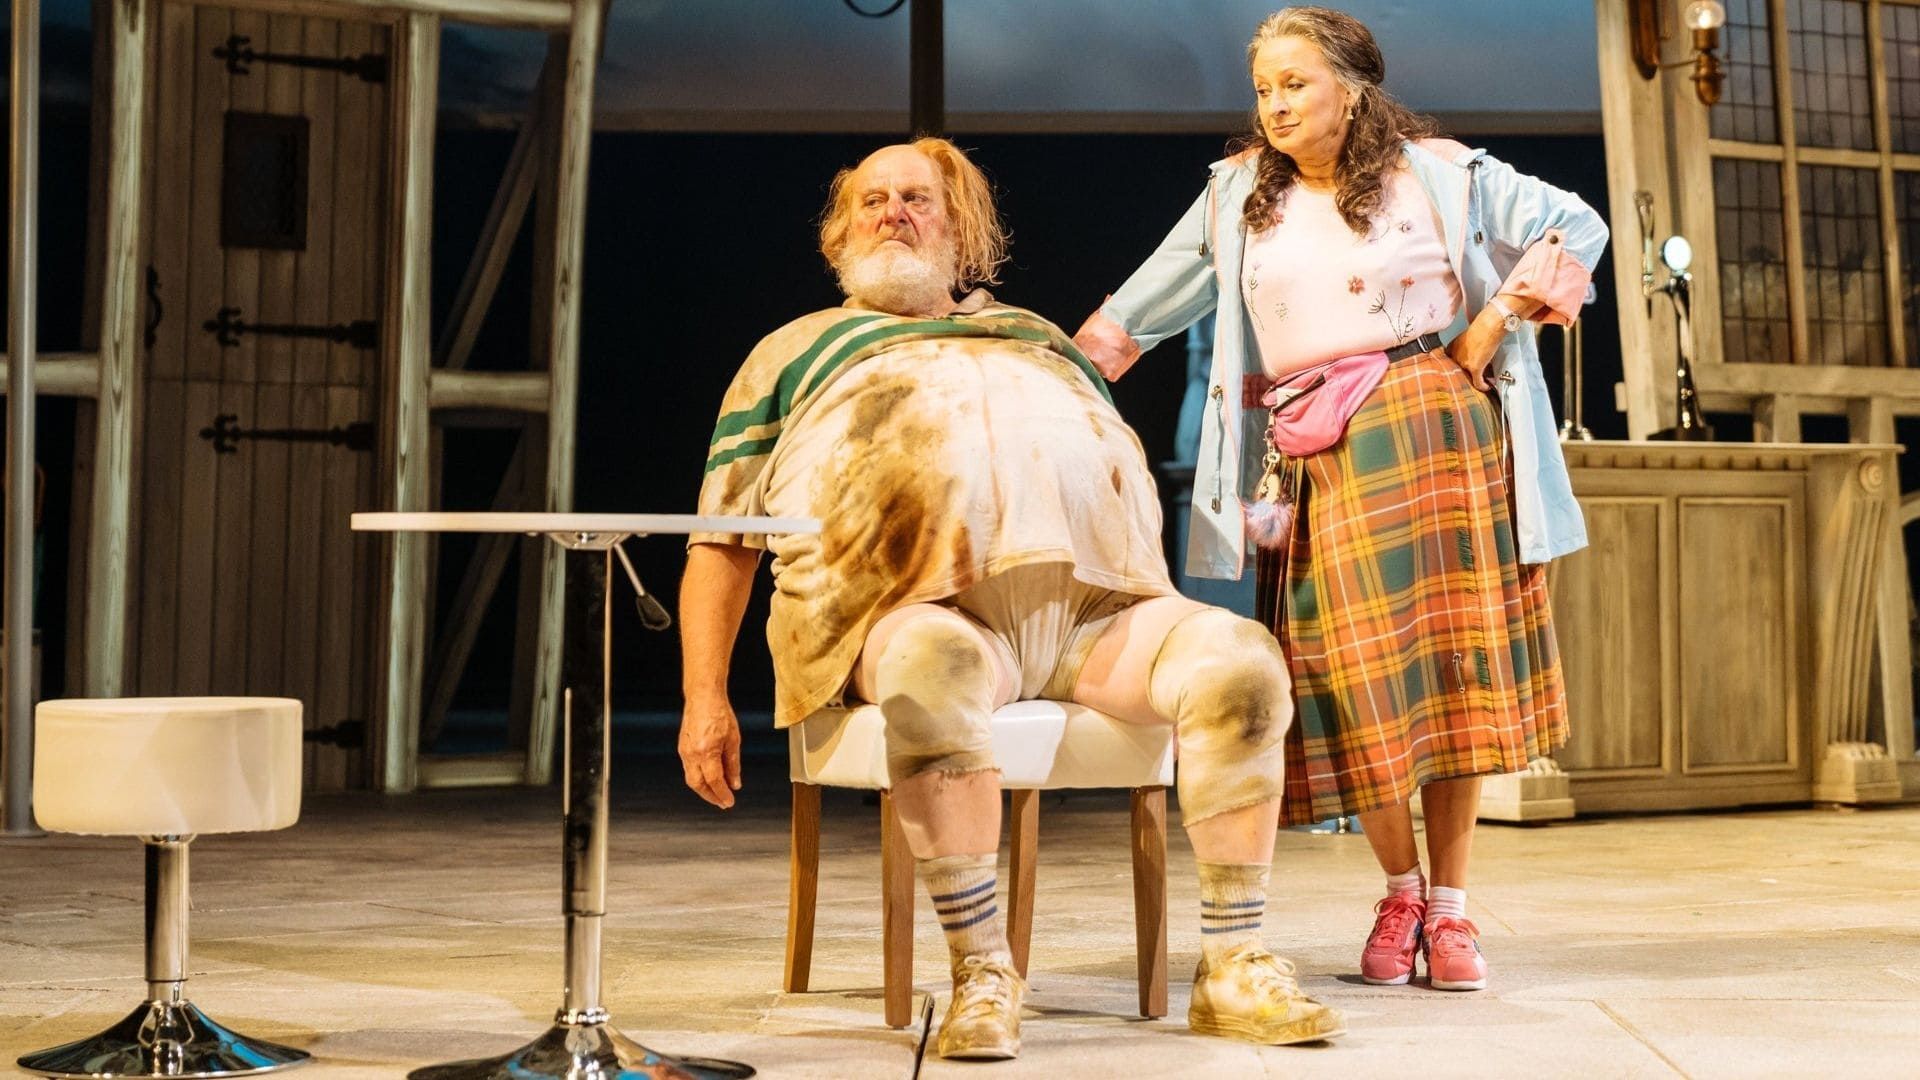 Royal Shakespeare Company: The Merry Wives of Windsor background